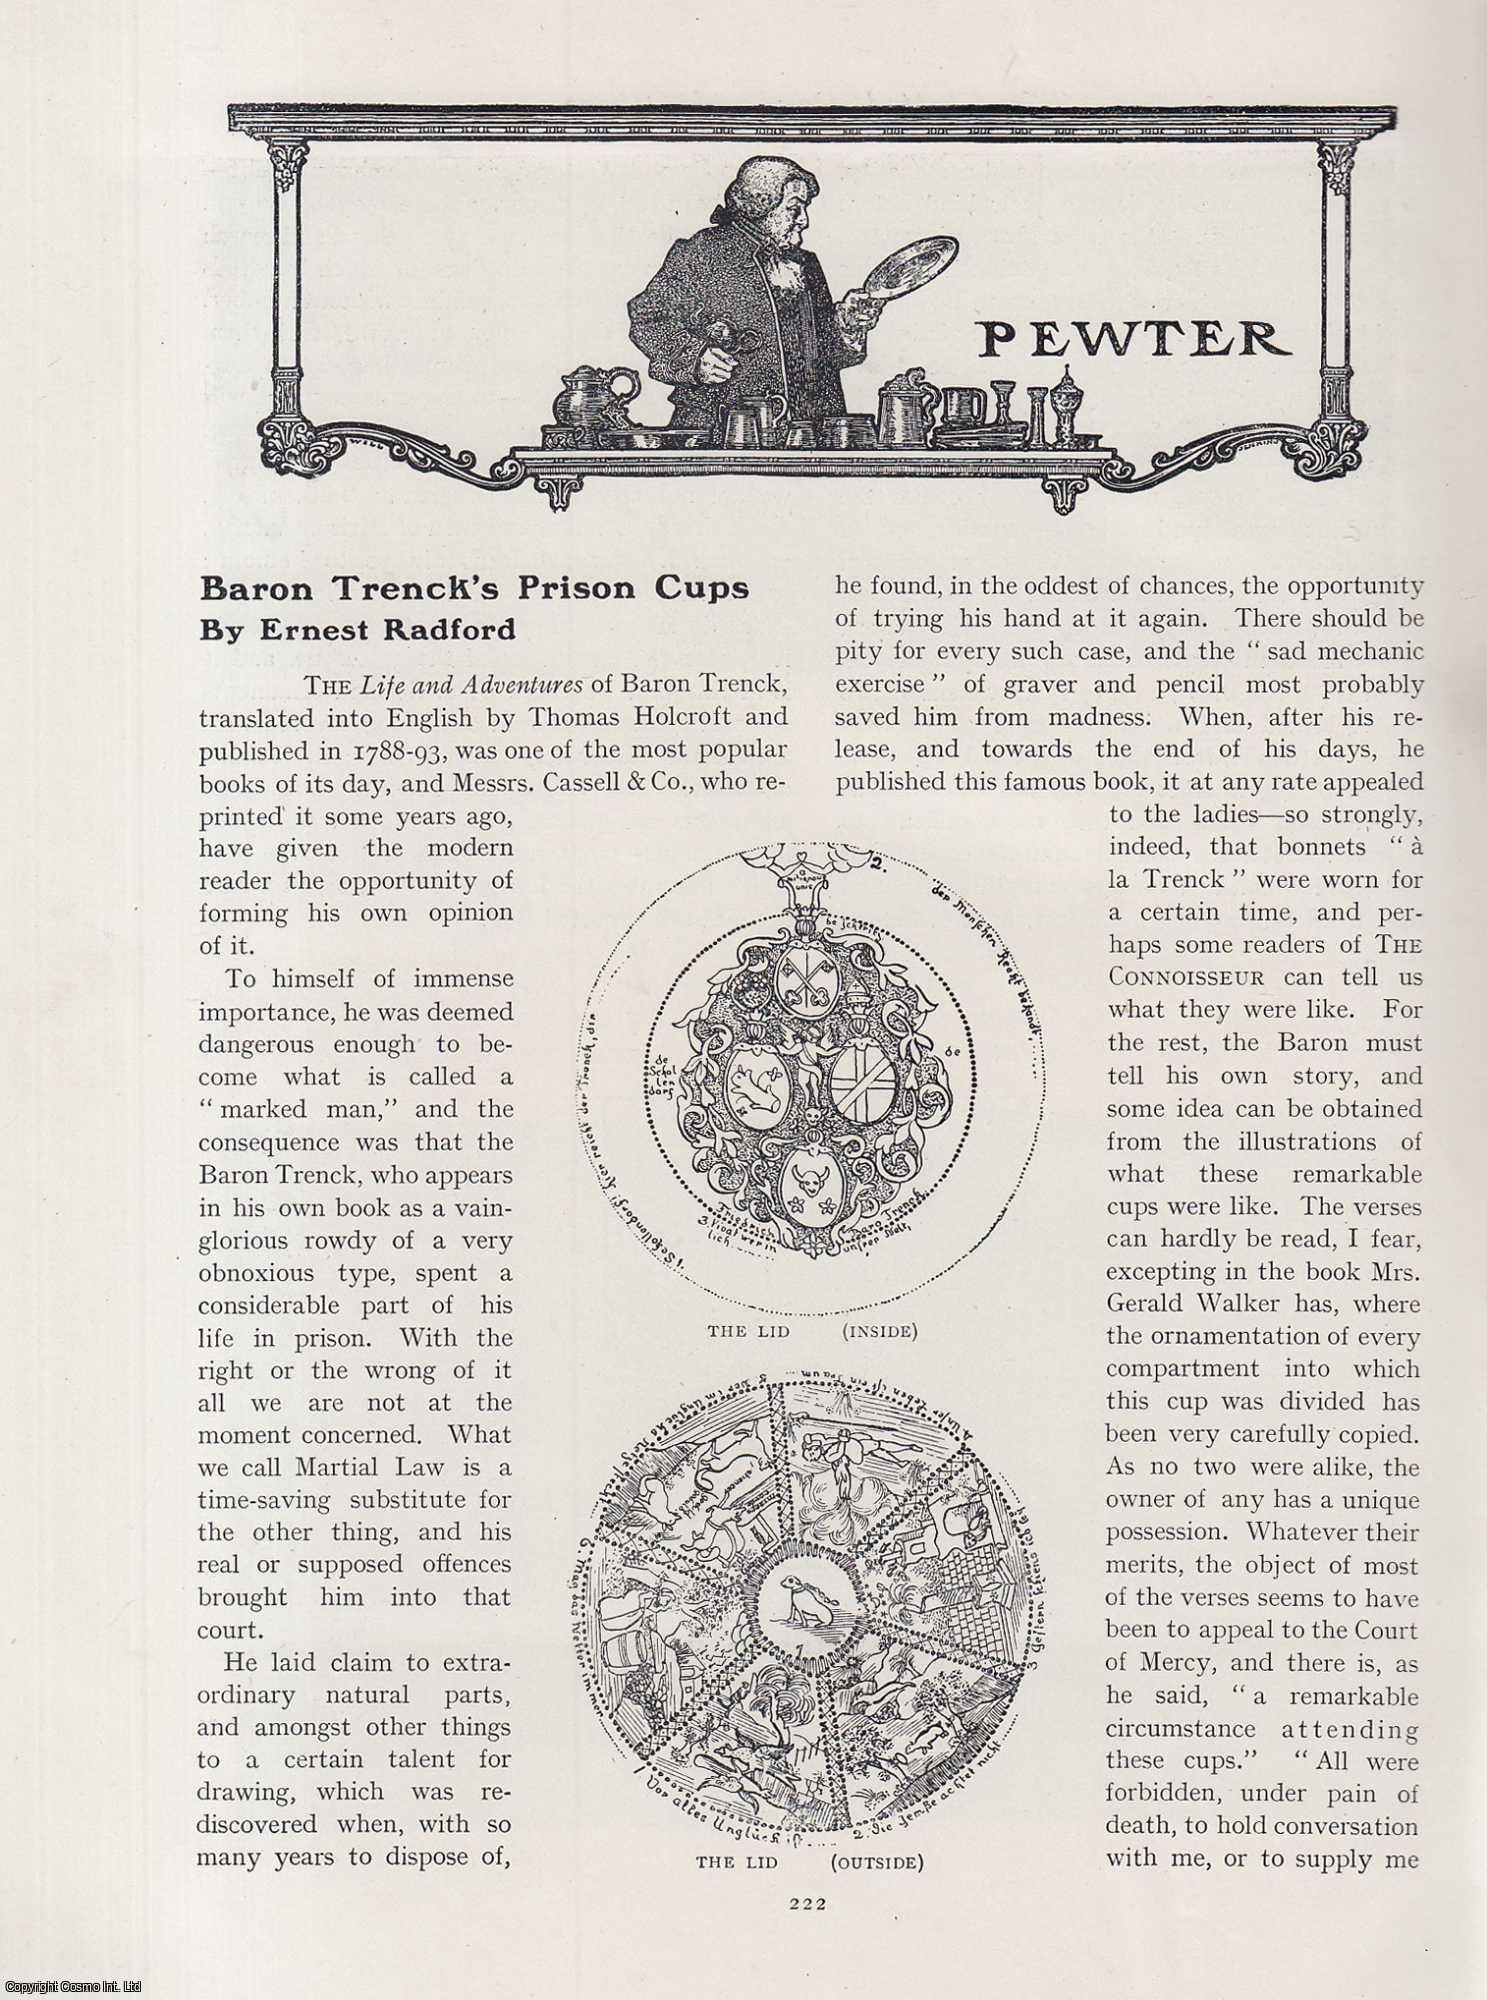 Ernest Radford - Baron Trenck's Prison Cups. An original article from The Connoisseur, 1904.